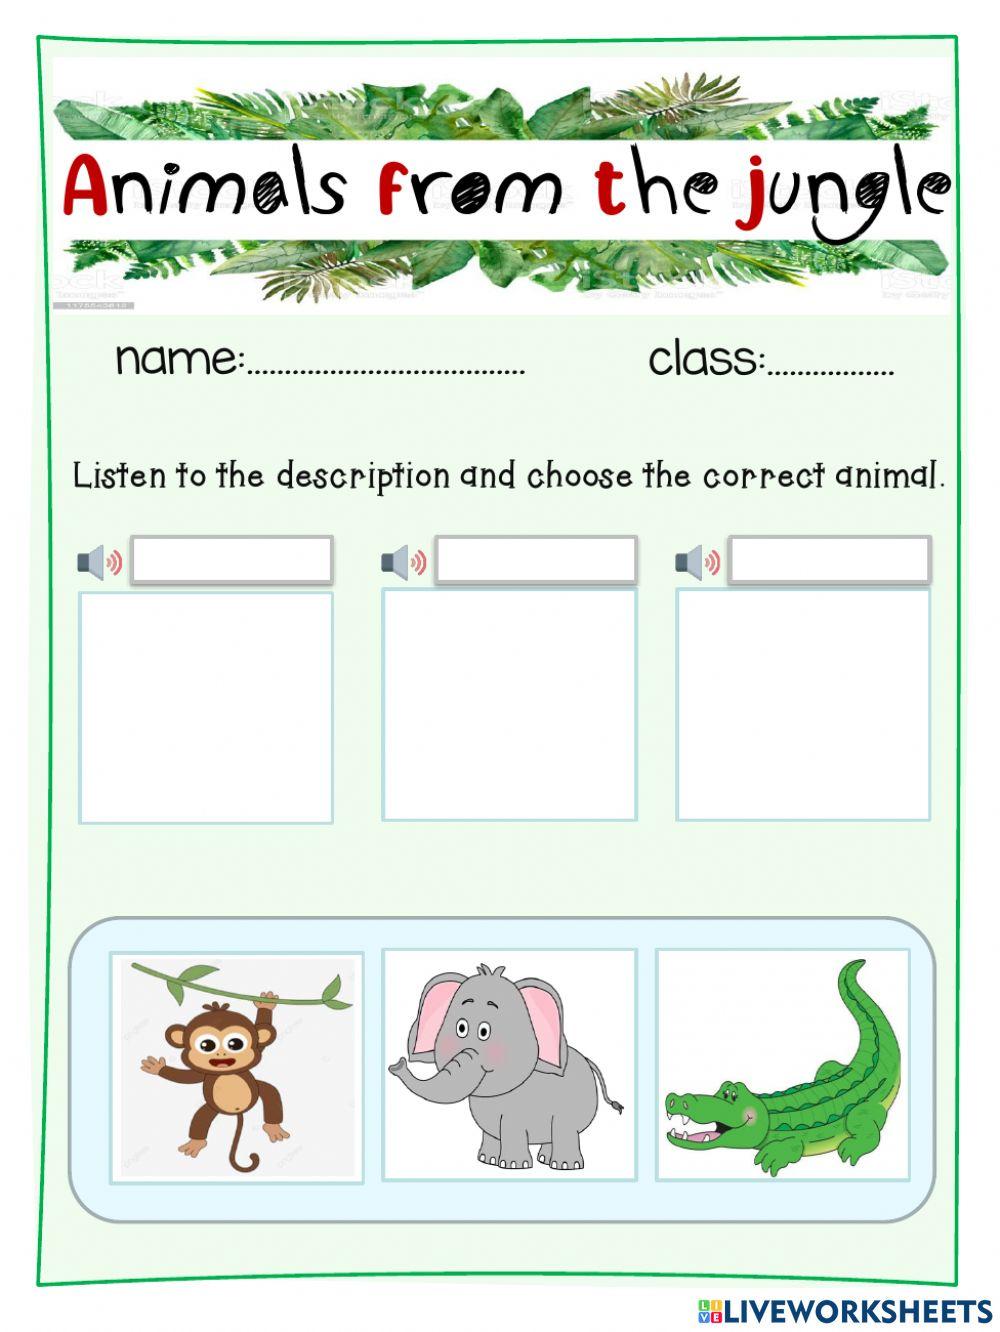 Animals from the jungle